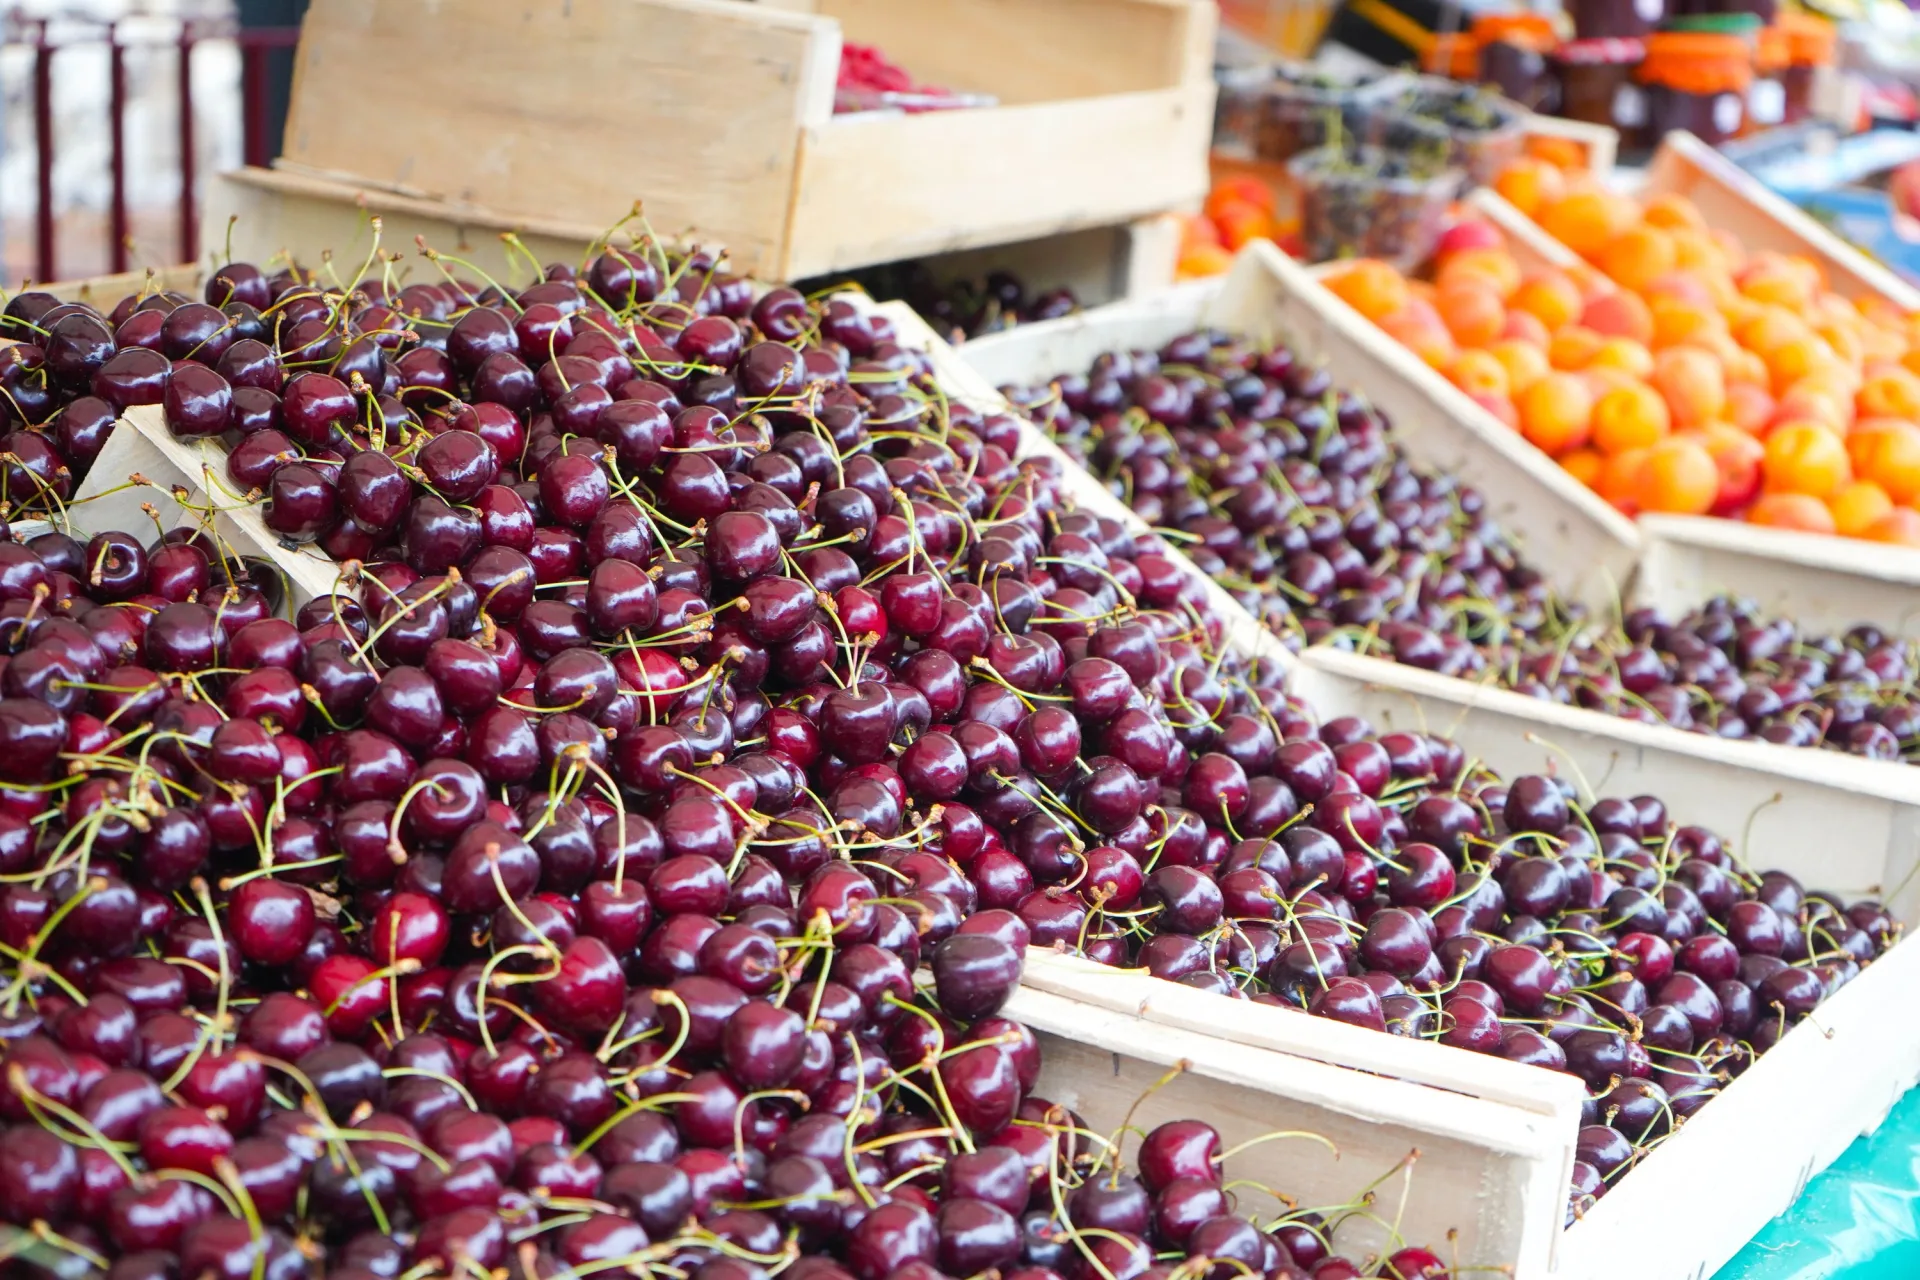 Yonne cherries at the Toucy market